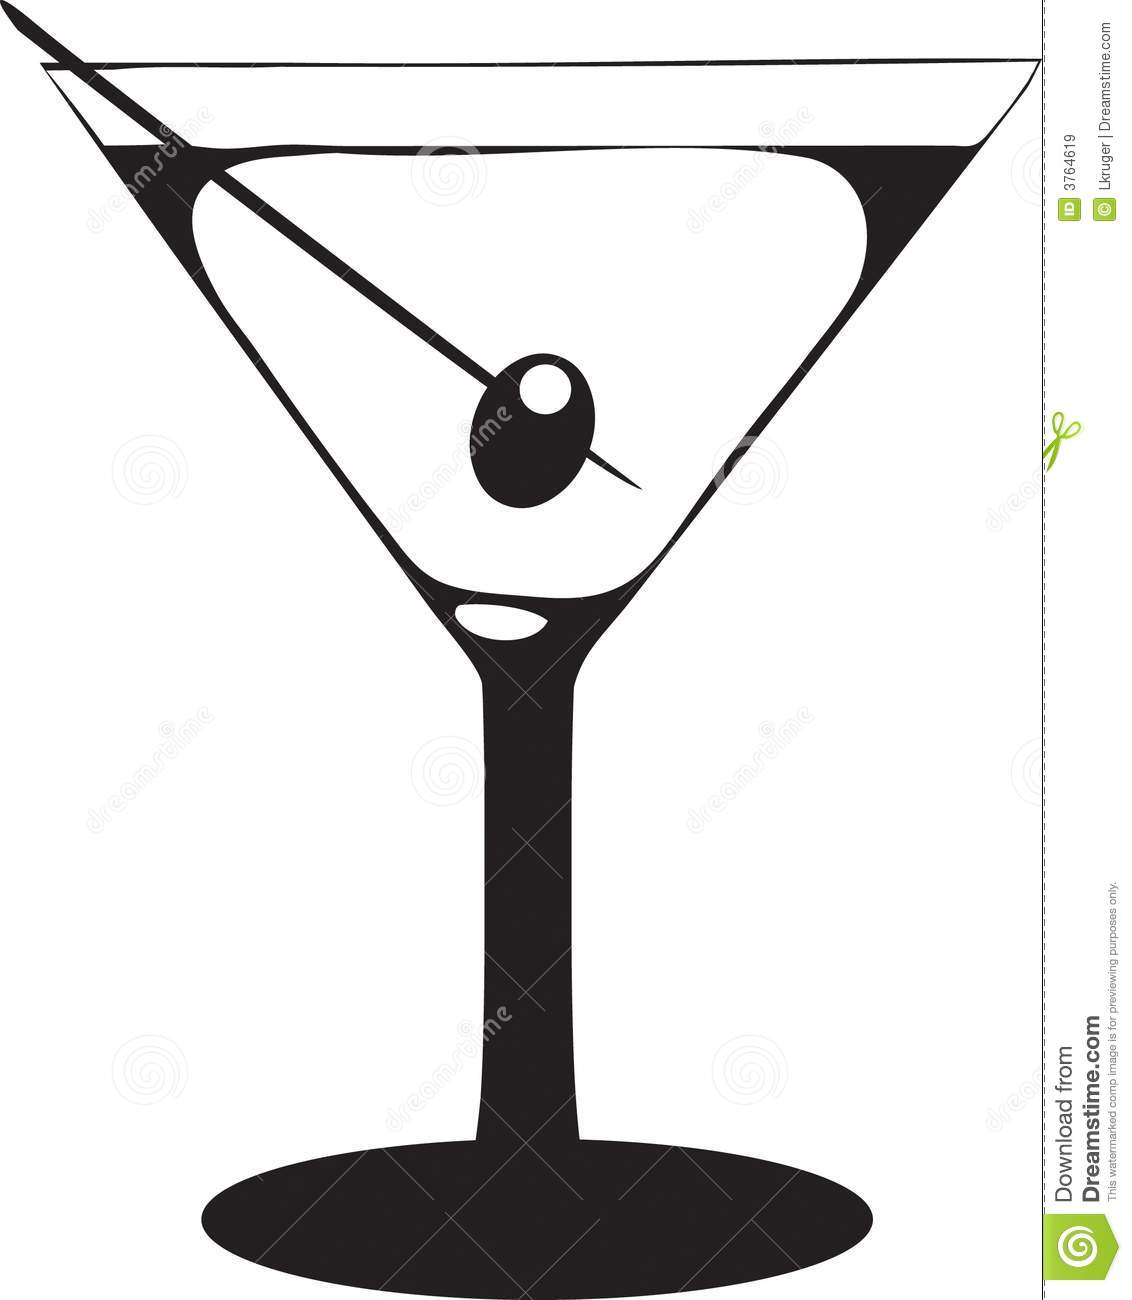 Martini Glass With Olive Royalty Free Stock Images   Image  3764619